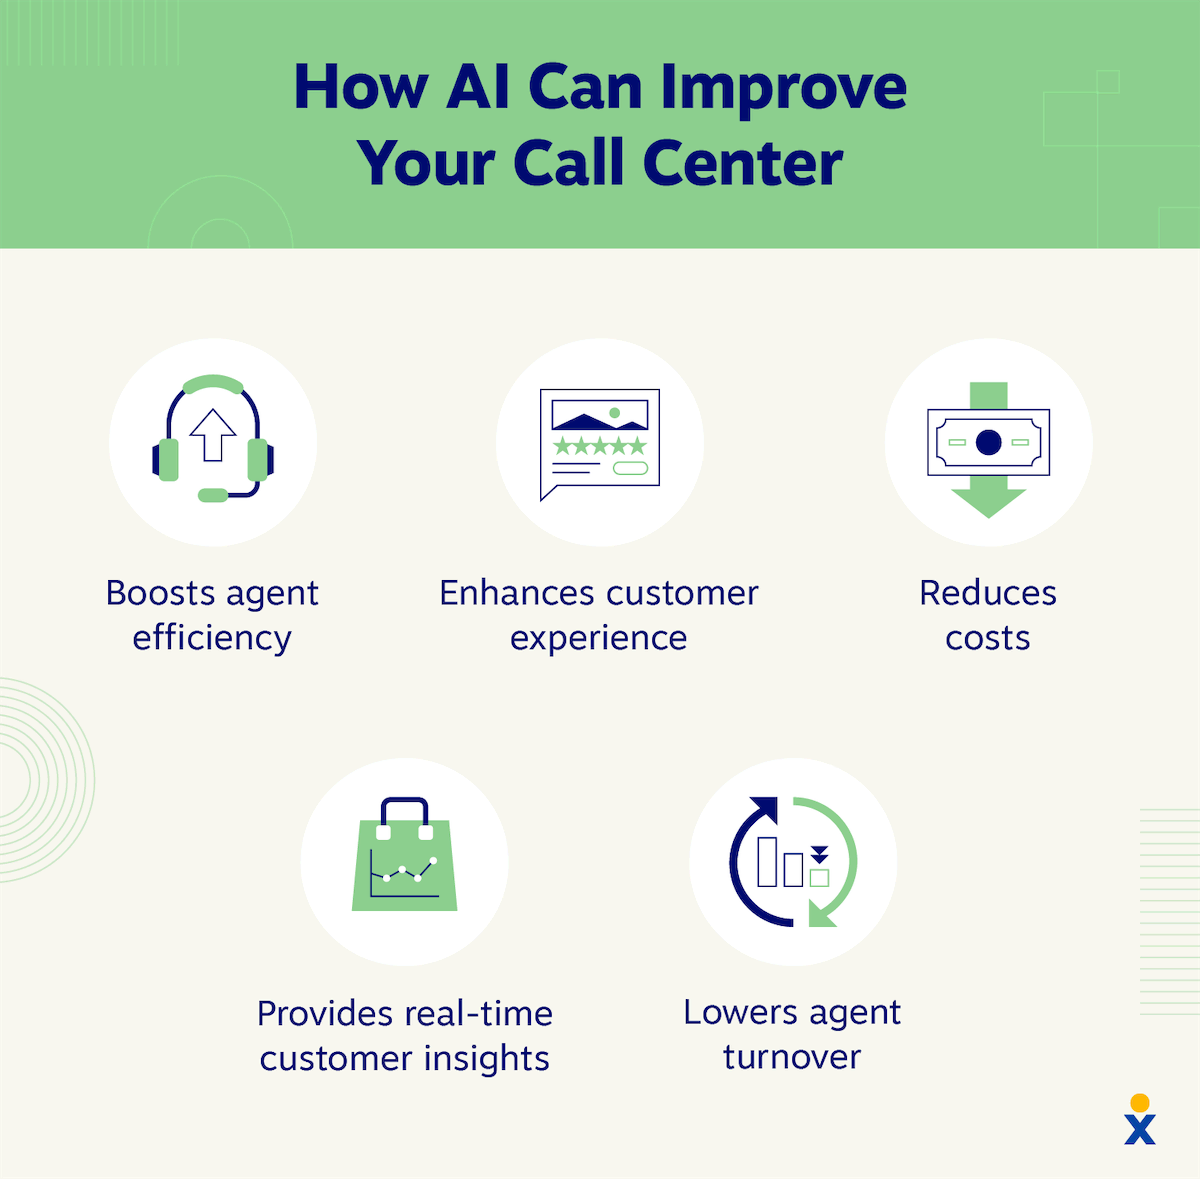 How AI can improve your call center